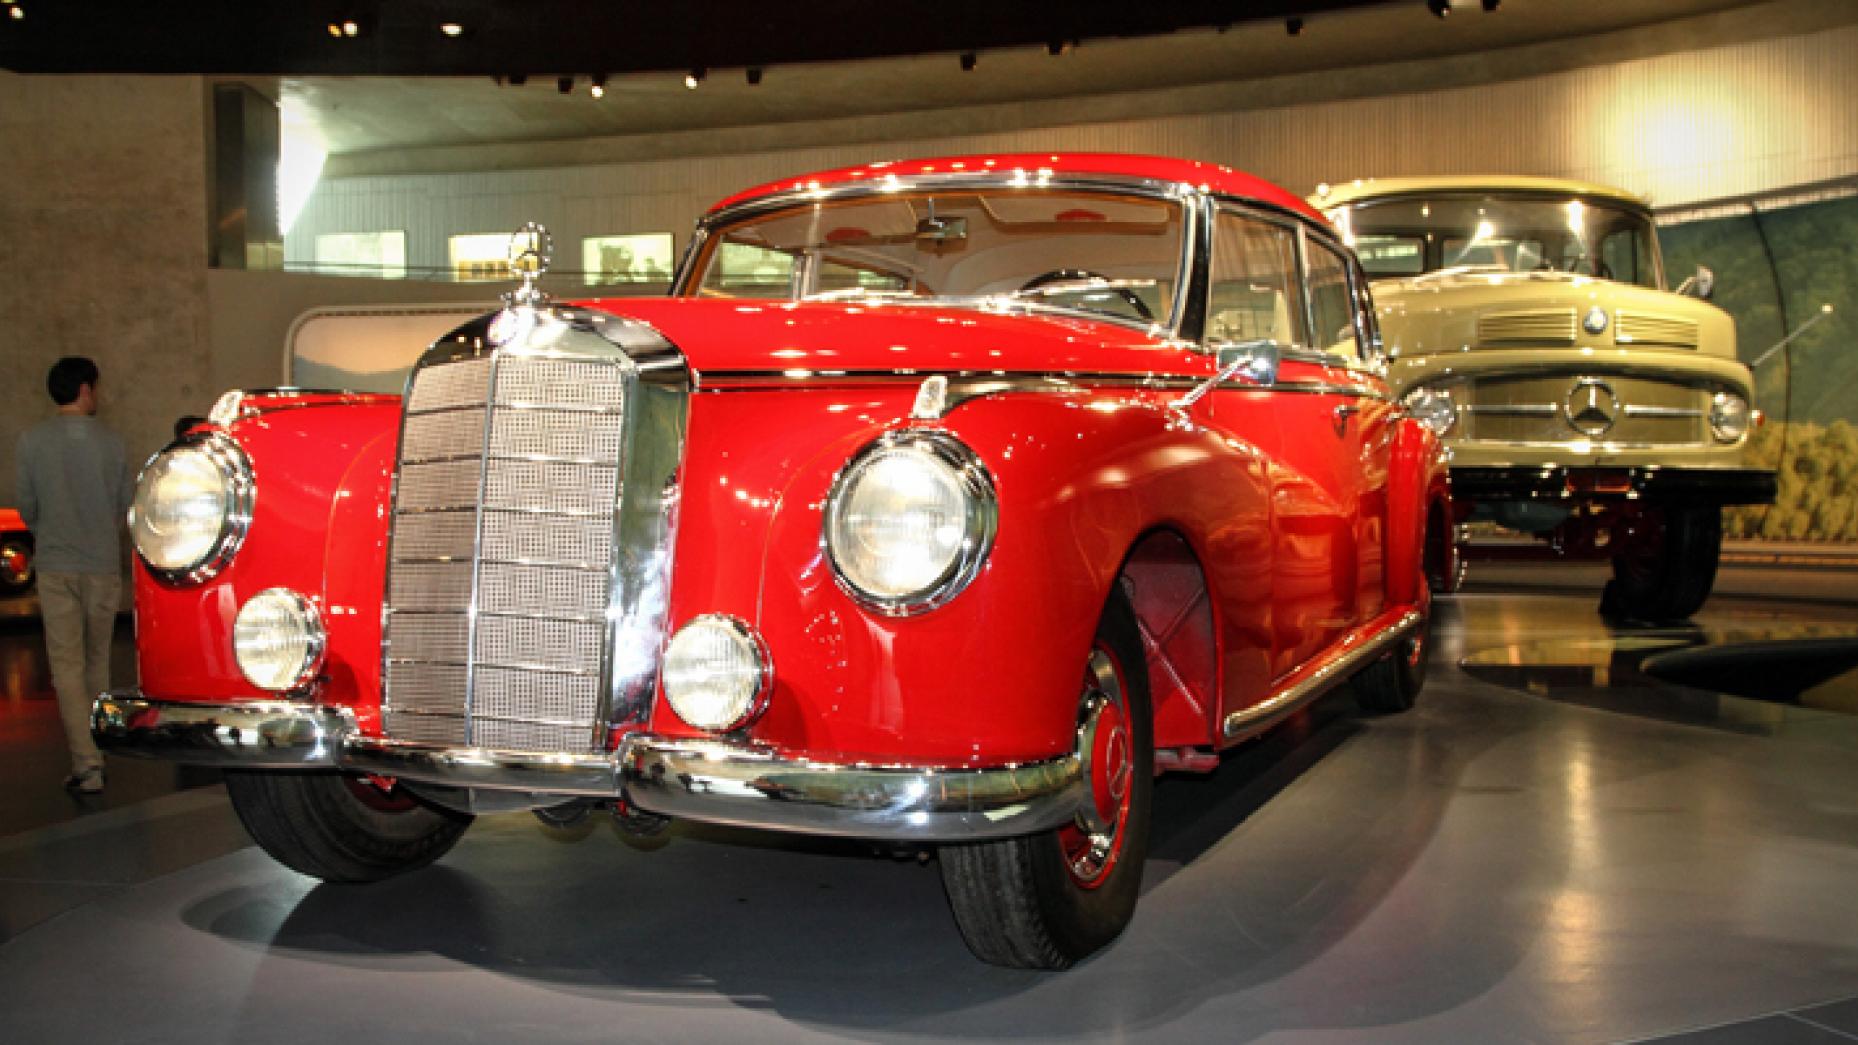 1951 MERCEDES-BENZ 300: Ah yes, the first big Mercedes that represented the important types of the then young Federal Republic. Over 4,000 300s were built, and one ferried the derriere of Konrad Adenauer, Chancellor of Germany.